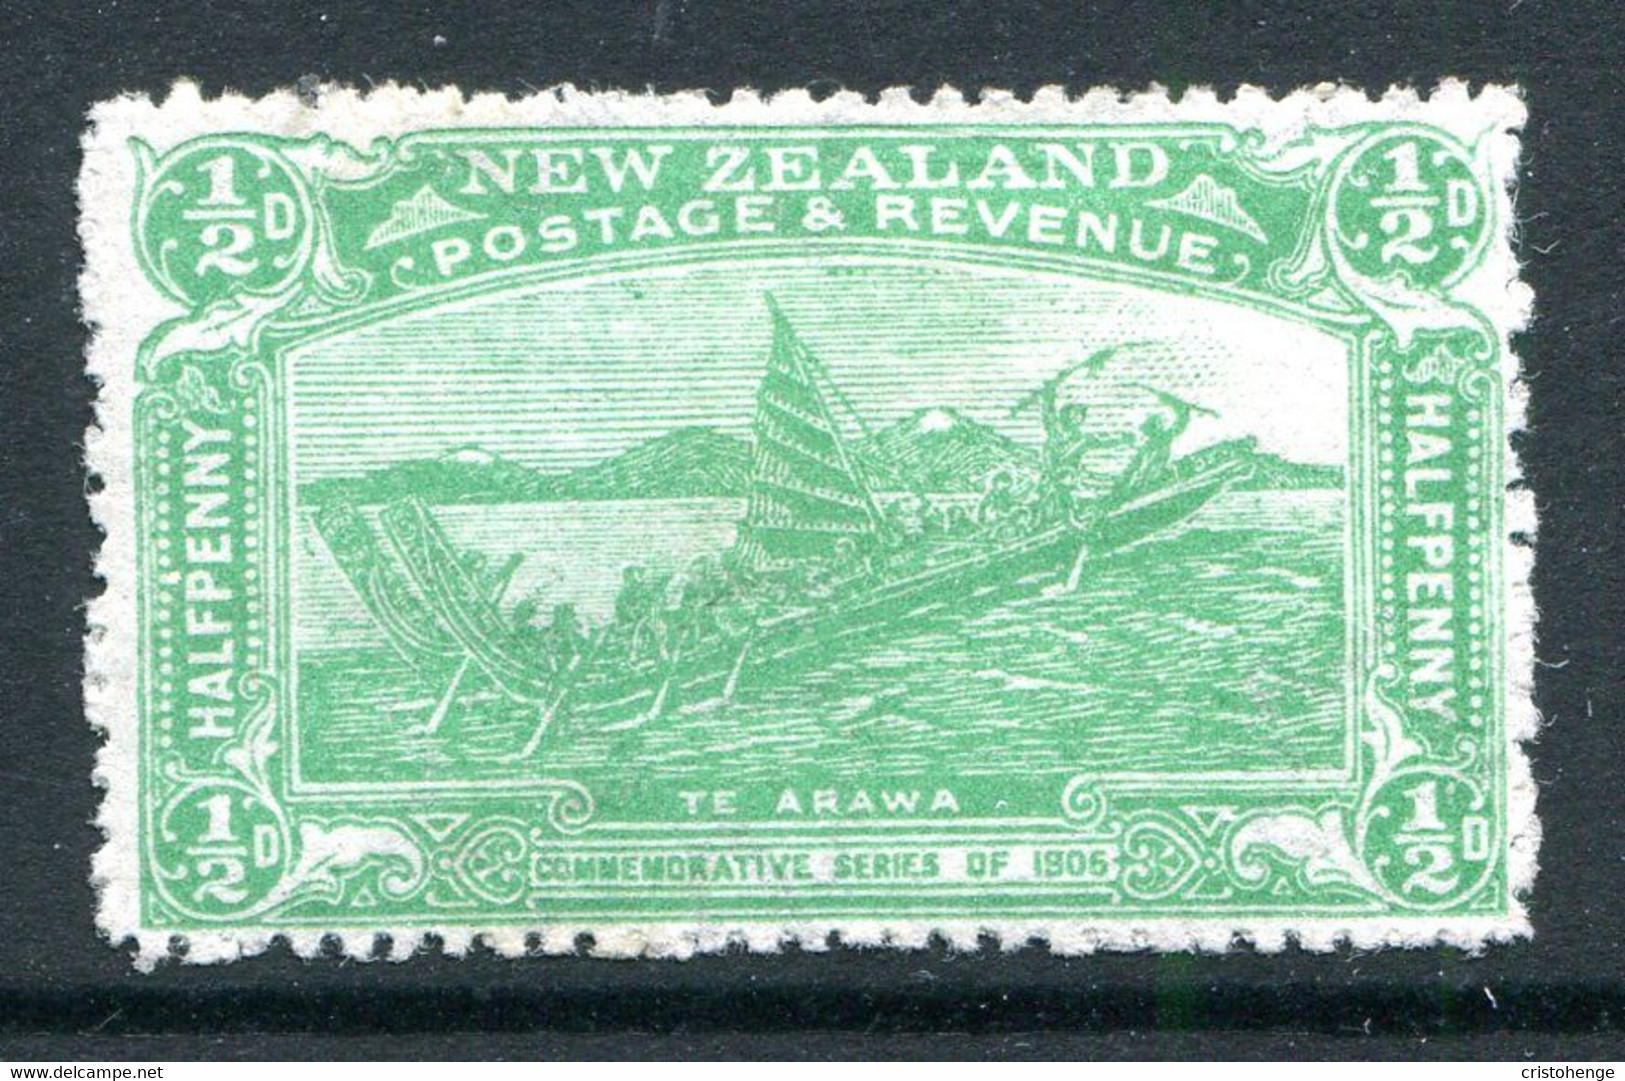 New Zealand 1906 Christchurch Exhibition - ½d Maori Canoe HM (SG 370) - Unused Stamps